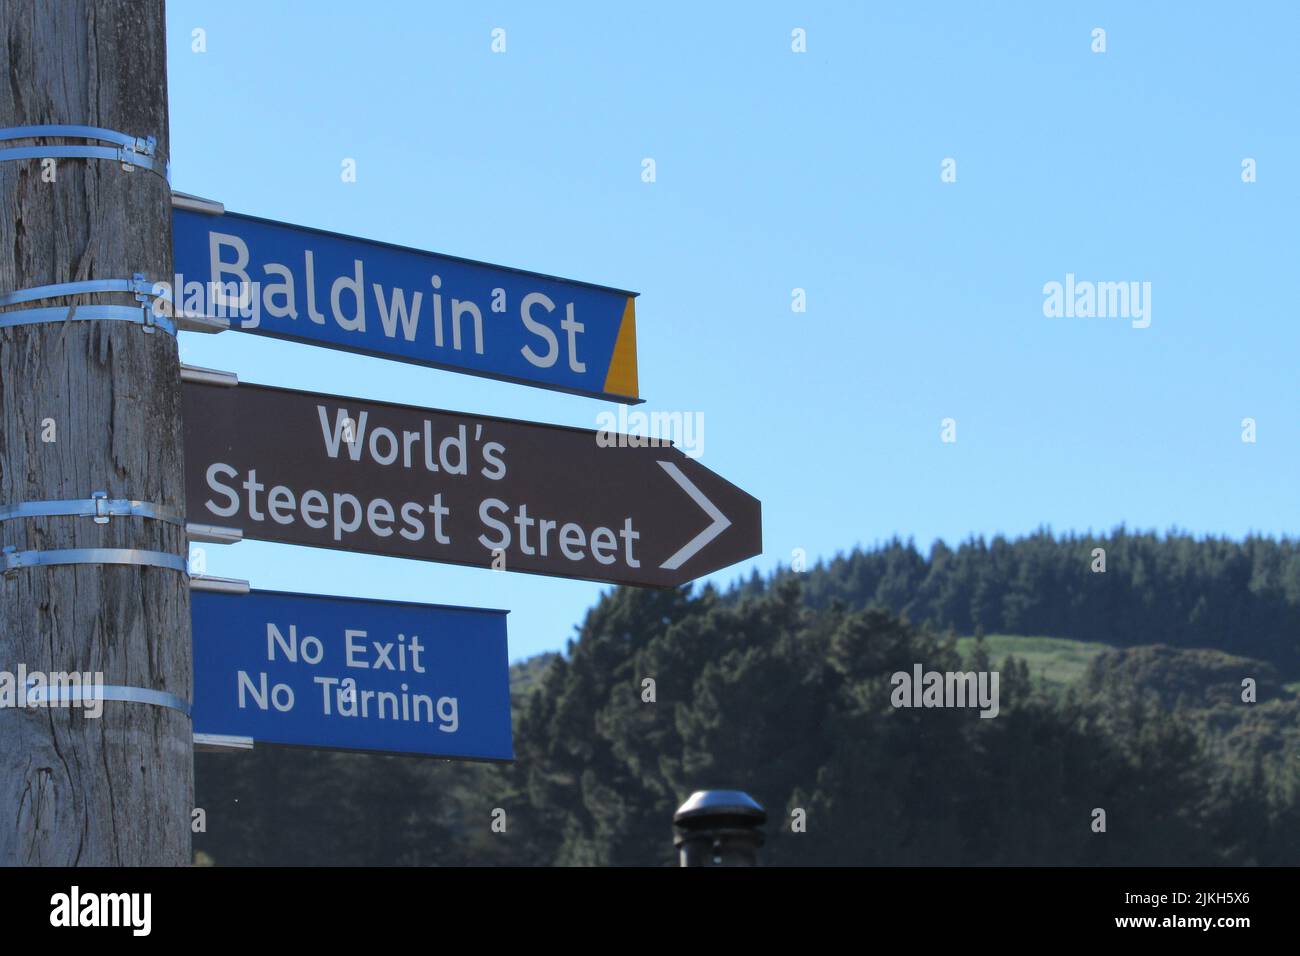 A closeup of a post with road signs of Baldwin Street, New Zealand in Dunedin Stock Photo